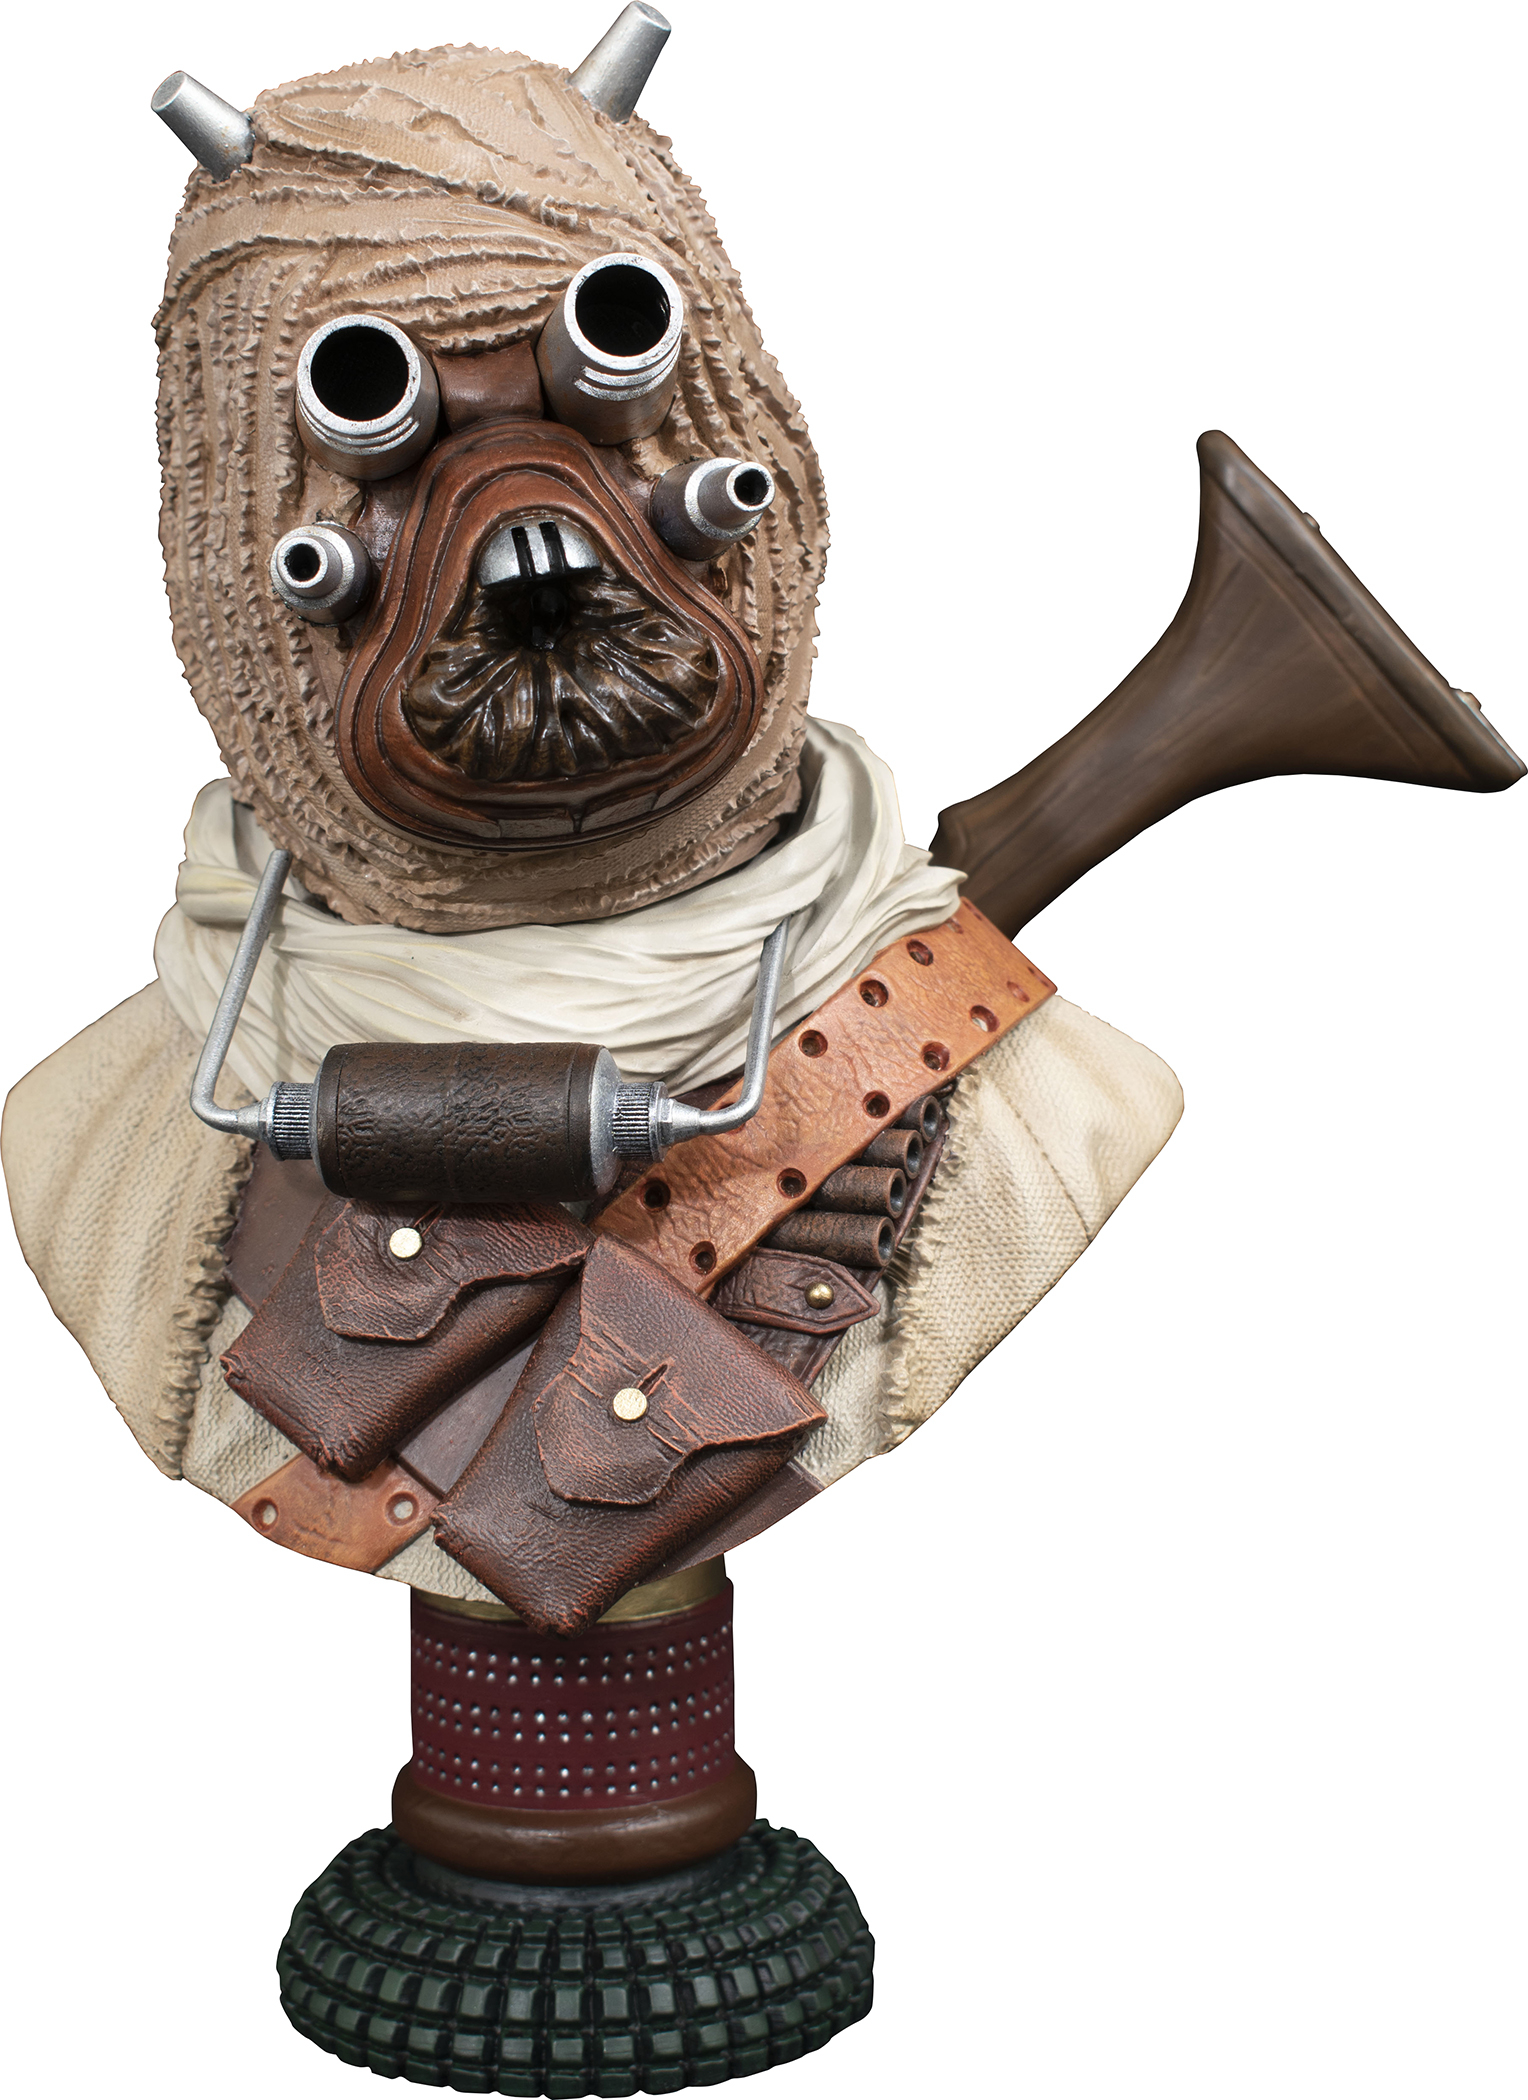 STAR WARS LEGENDS IN 3D ANH TUSKEN RAIDER 1/2 SCALE BUST